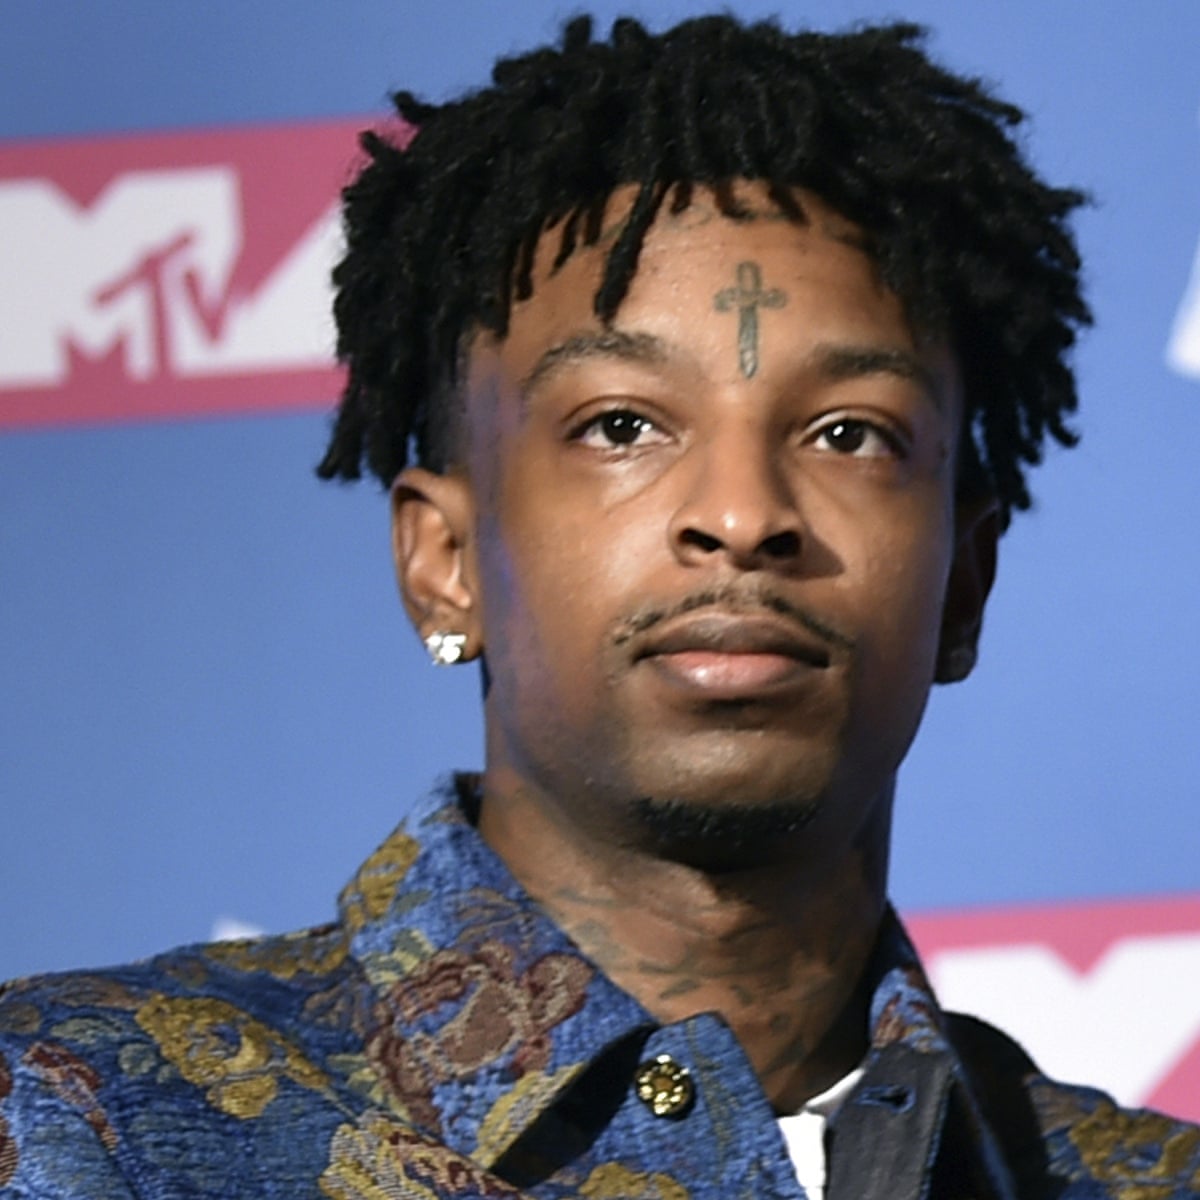 Rapper 21 Savage Did Not Talk About Being British For Fear Of Us